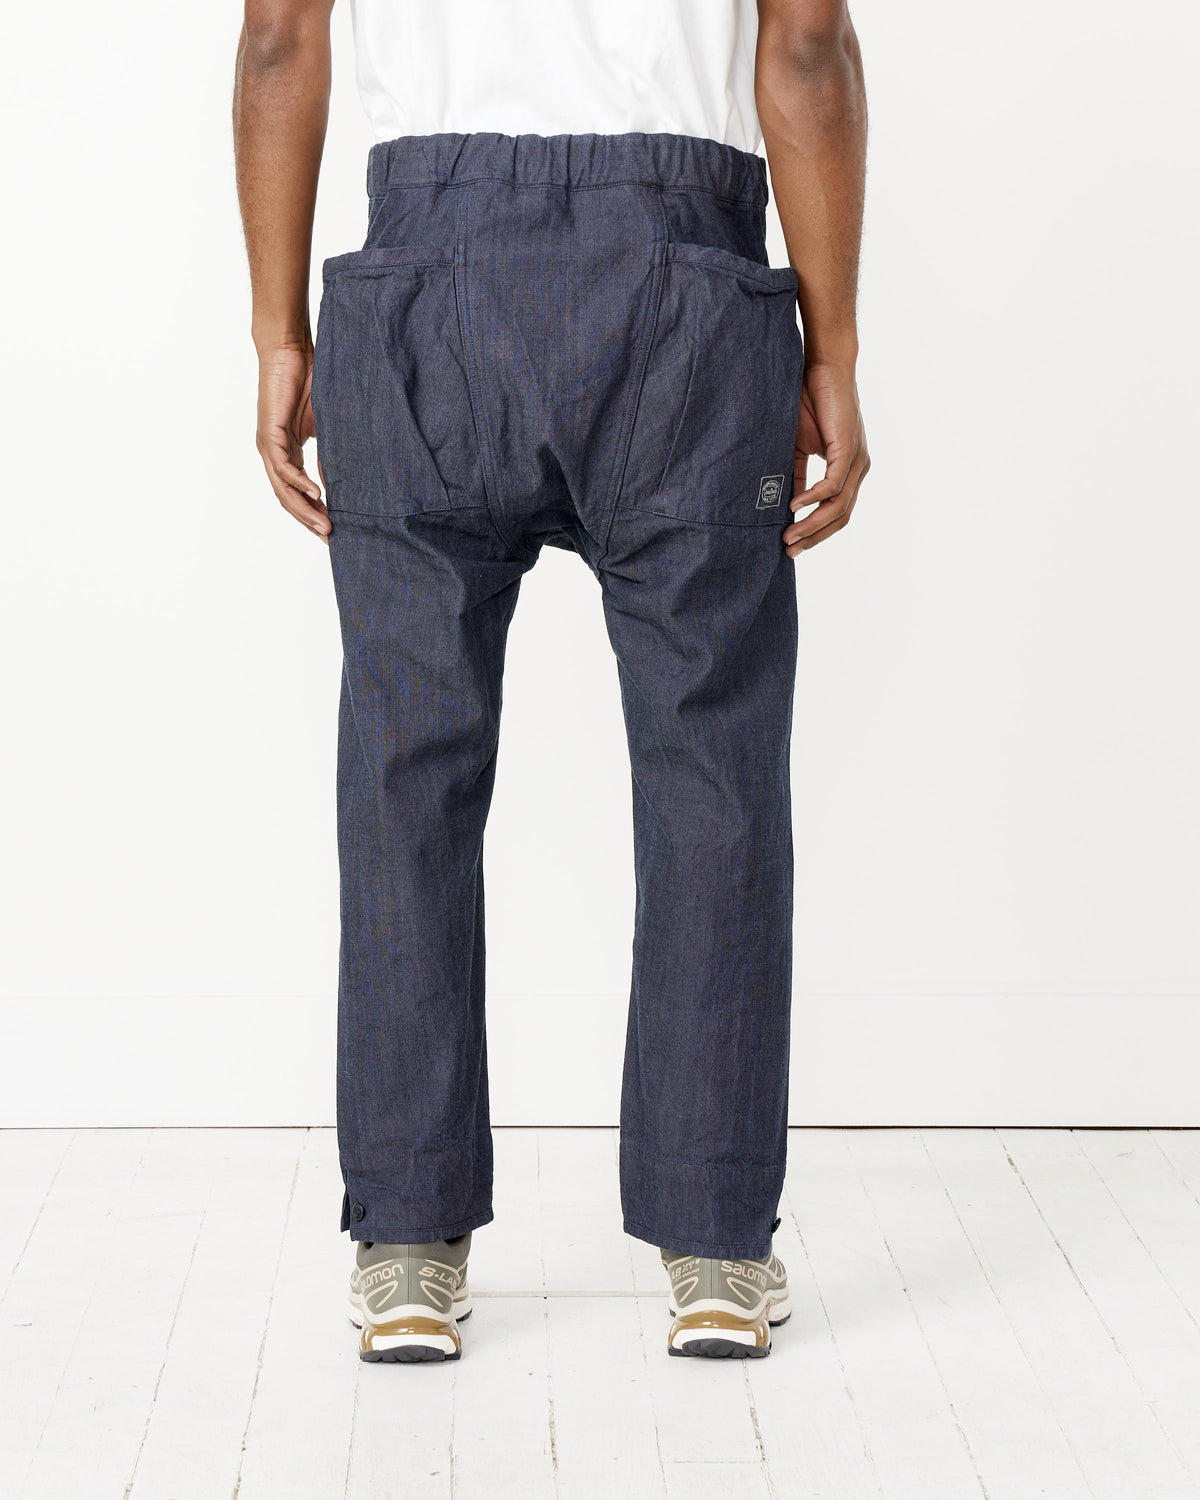 Discover the Ultimate Shopping Experience : OG Canvas Noragi Pants